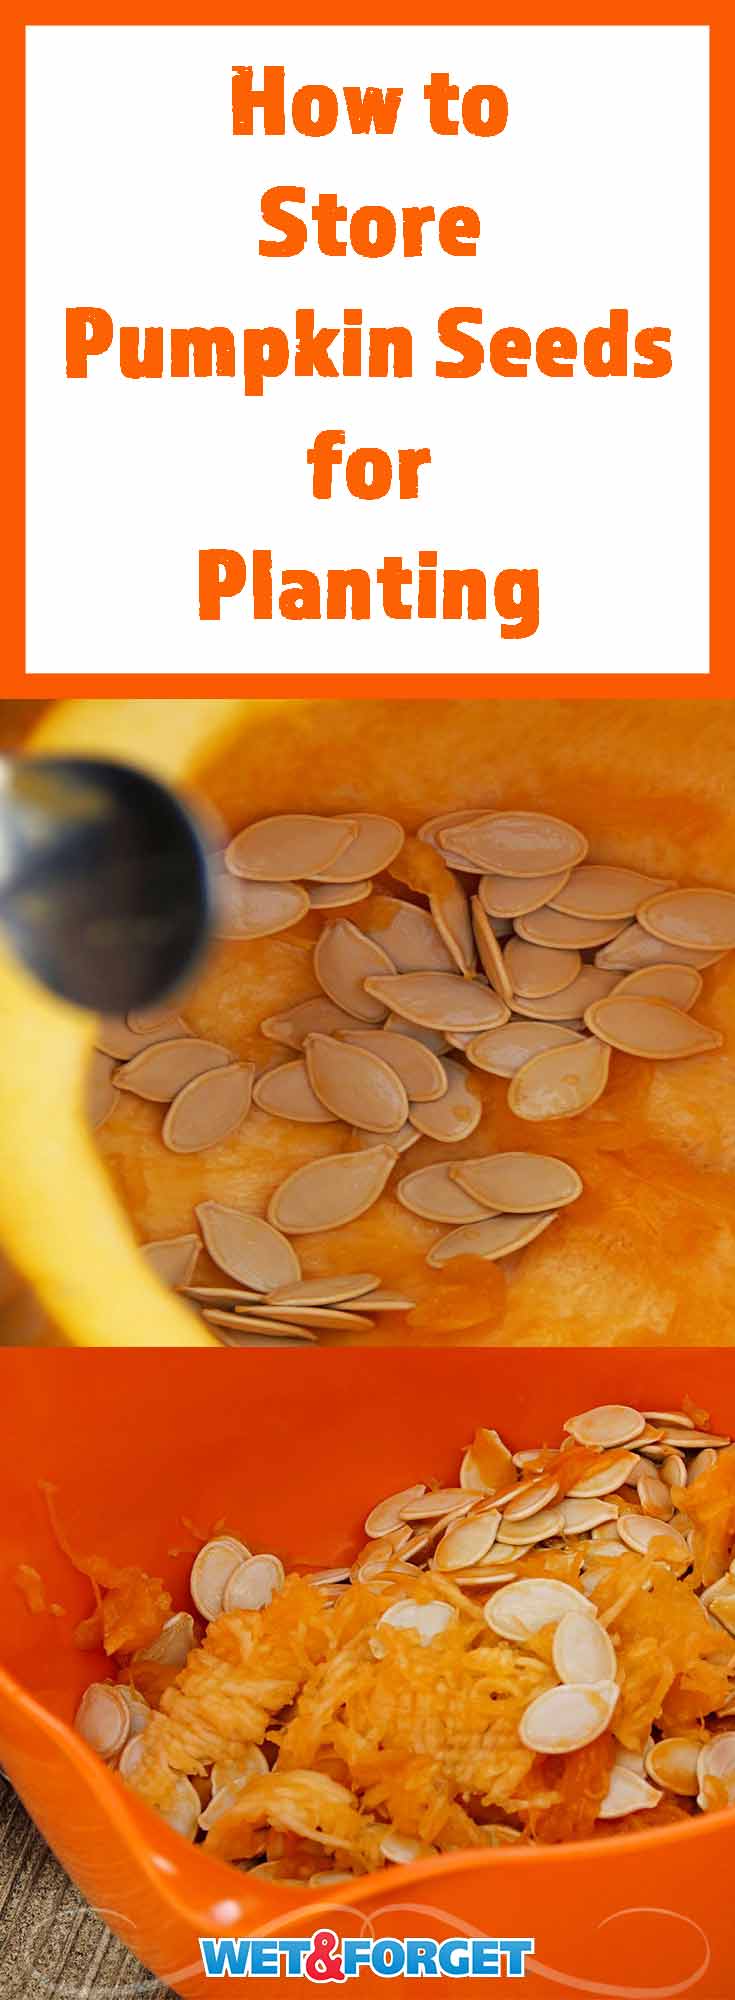 Save your pumpkin seeds after carving for planting! Use this easy method for storing pumpkin seeds for planting next year. 